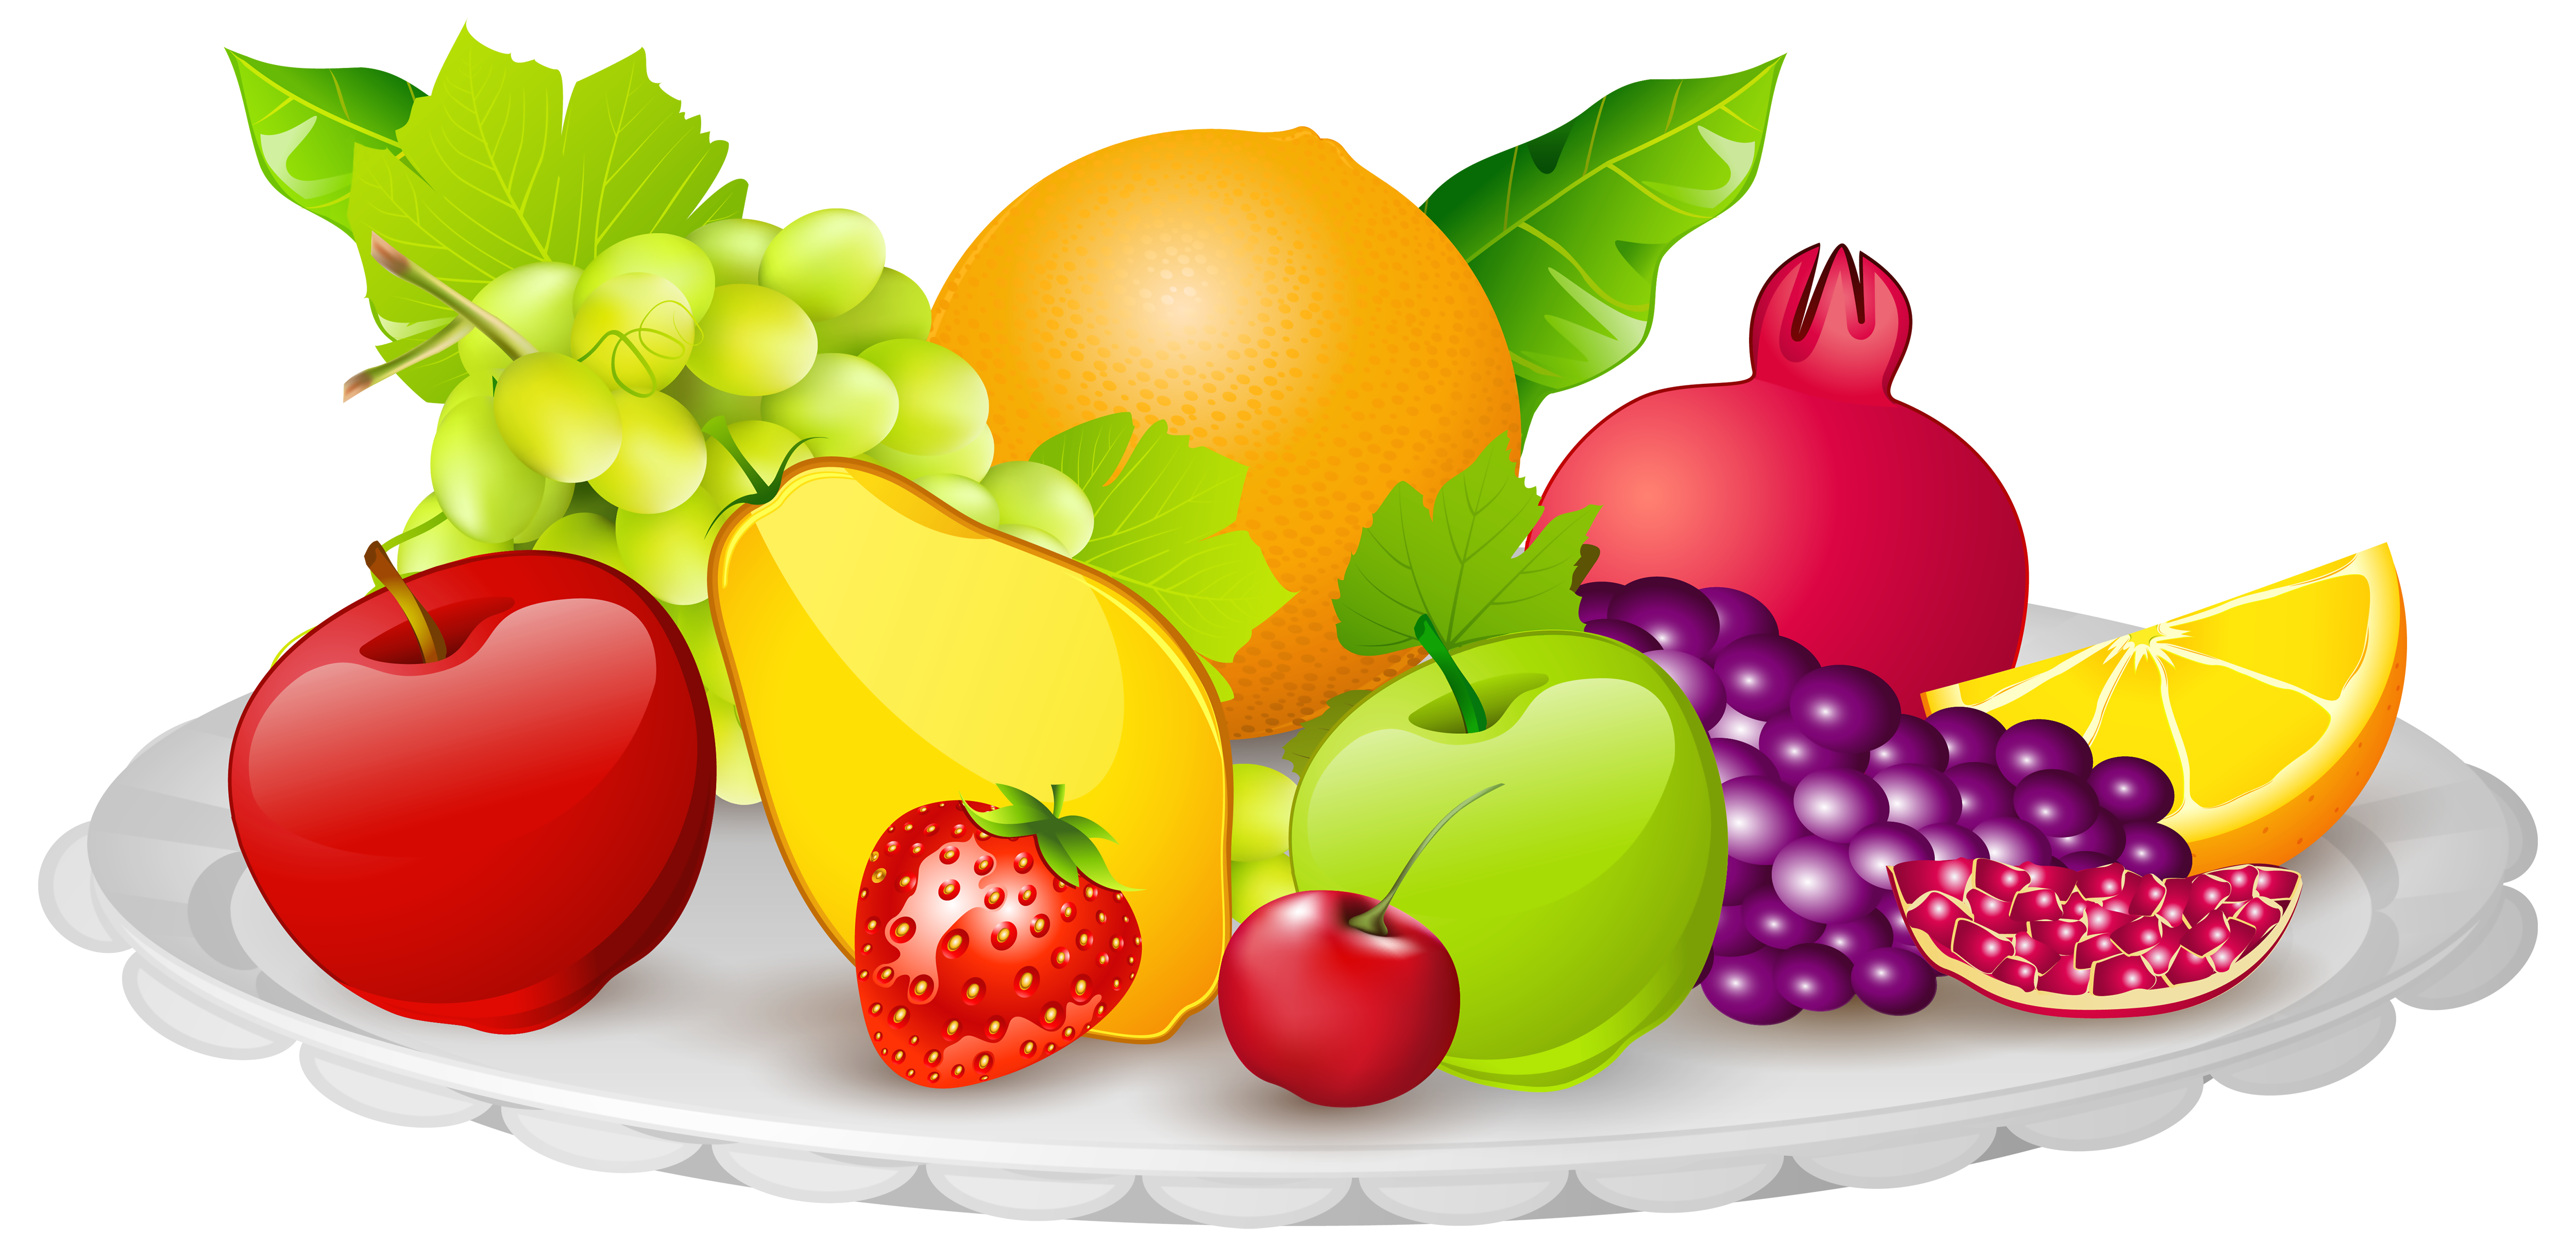 Plate with Fruits PNG Clipart Image 